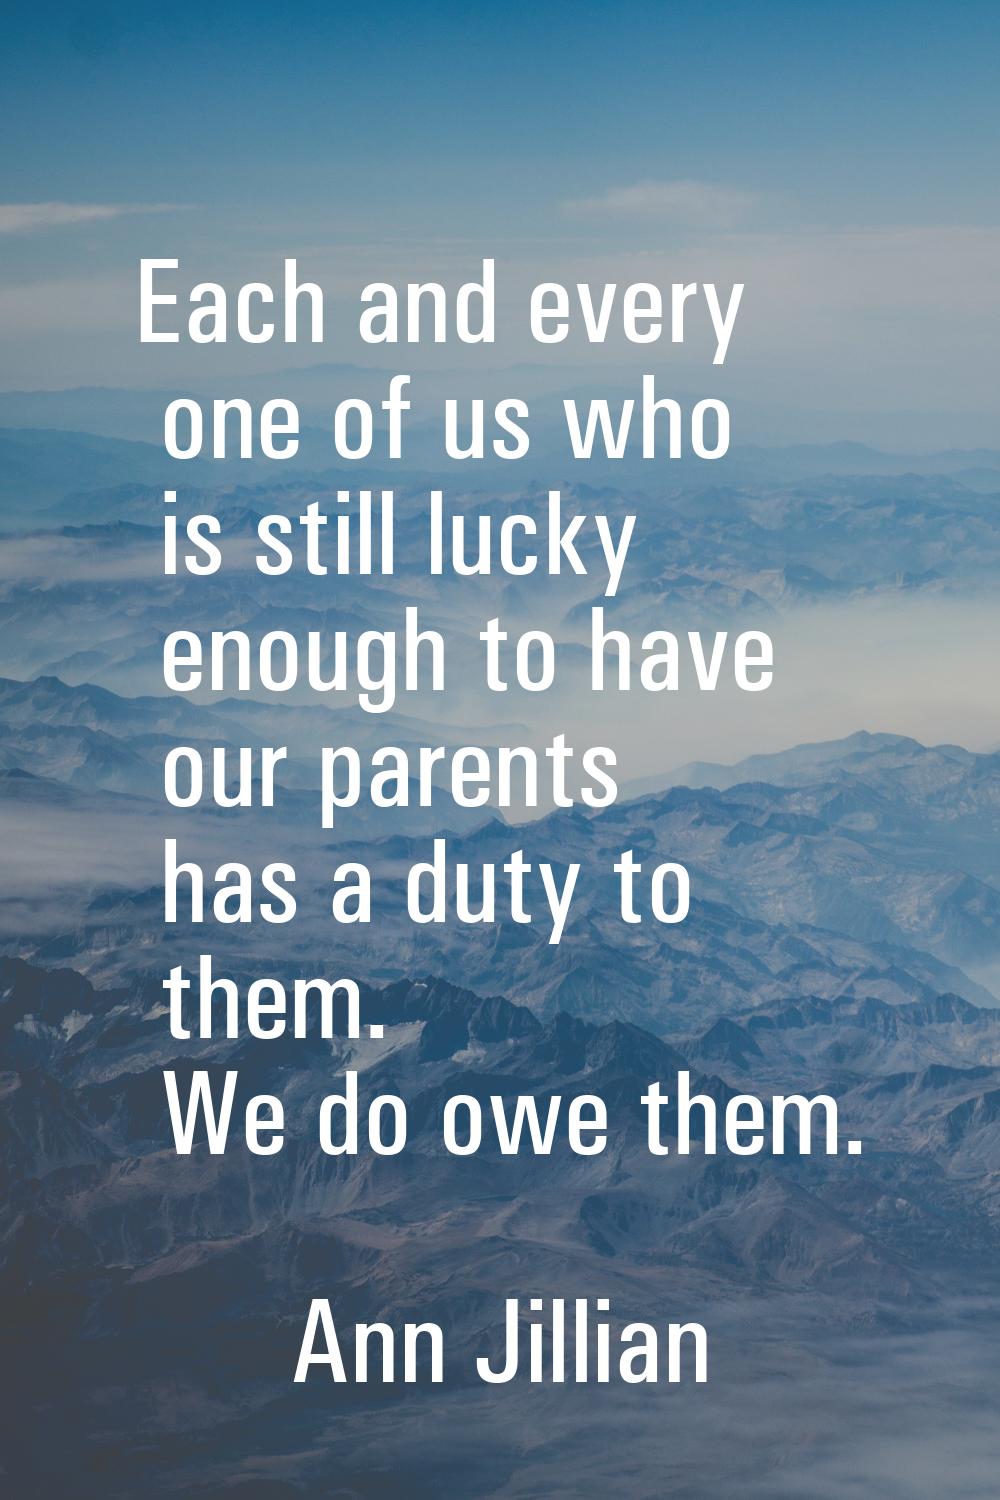 Each and every one of us who is still lucky enough to have our parents has a duty to them. We do ow